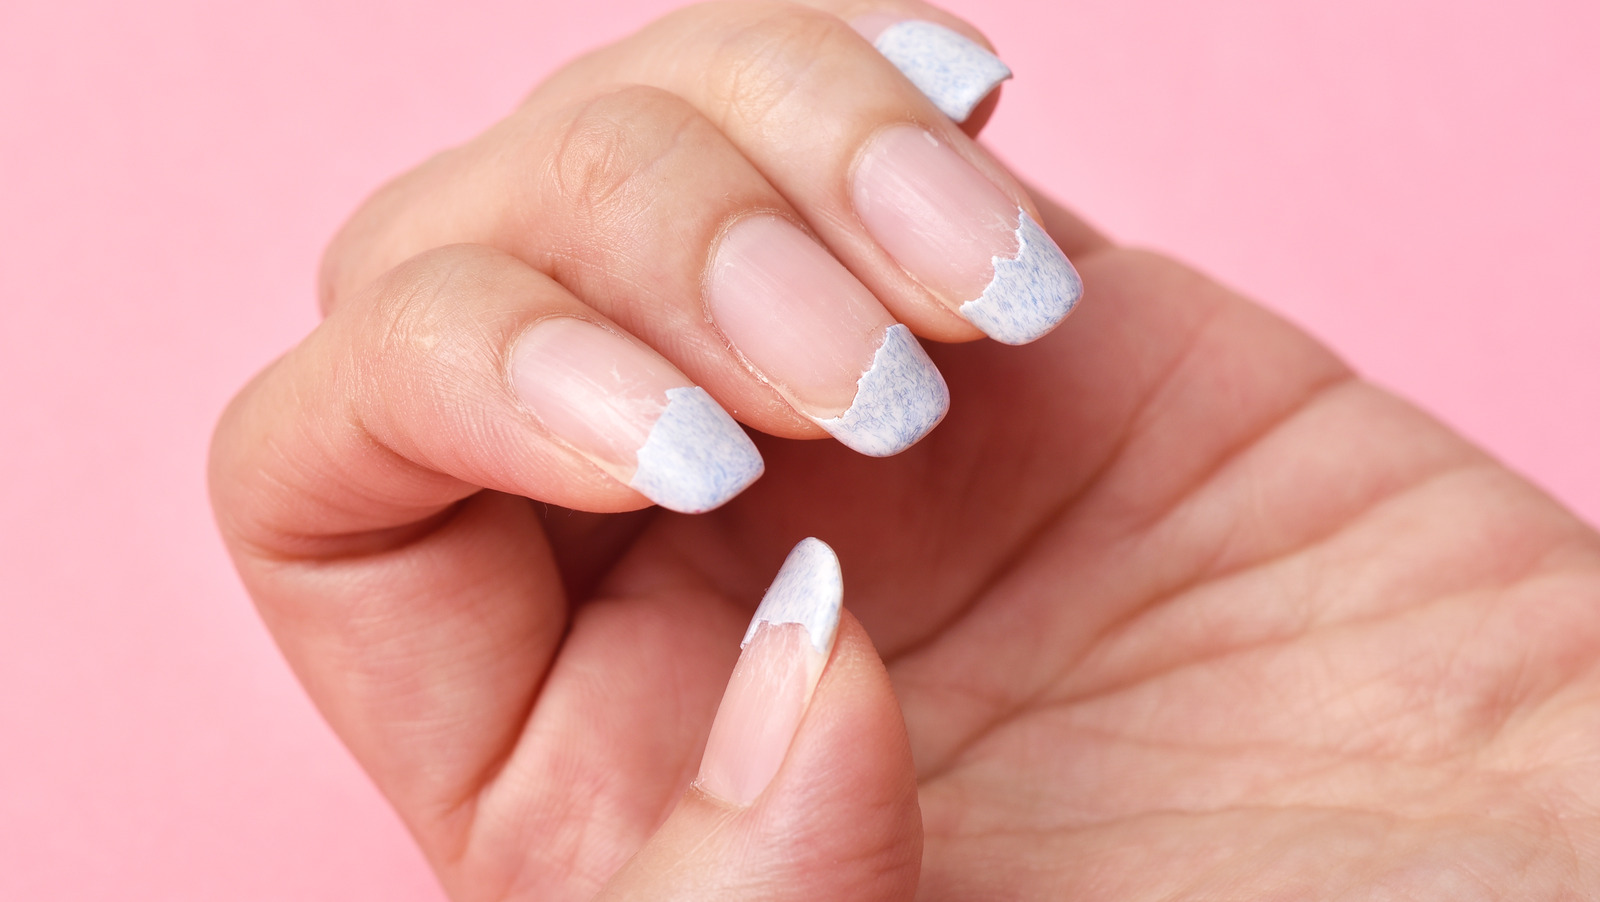 NAIL TAG Studio - 𝐇𝐨𝐰 𝐝𝐨 𝐲𝐨𝐮 𝐤𝐧𝐨𝐰 𝐲𝐨𝐮𝐫 𝐧𝐚𝐢𝐥𝐬 𝐚𝐫𝐞  𝐡𝐞𝐚𝐥𝐭𝐡𝐲? 1. 𝐁𝐫𝐢𝐭𝐭𝐥𝐞 𝐍𝐚𝐢𝐥𝐬 • Dry and brittle nails are  the result of too little moisture. They're most commonly caused by